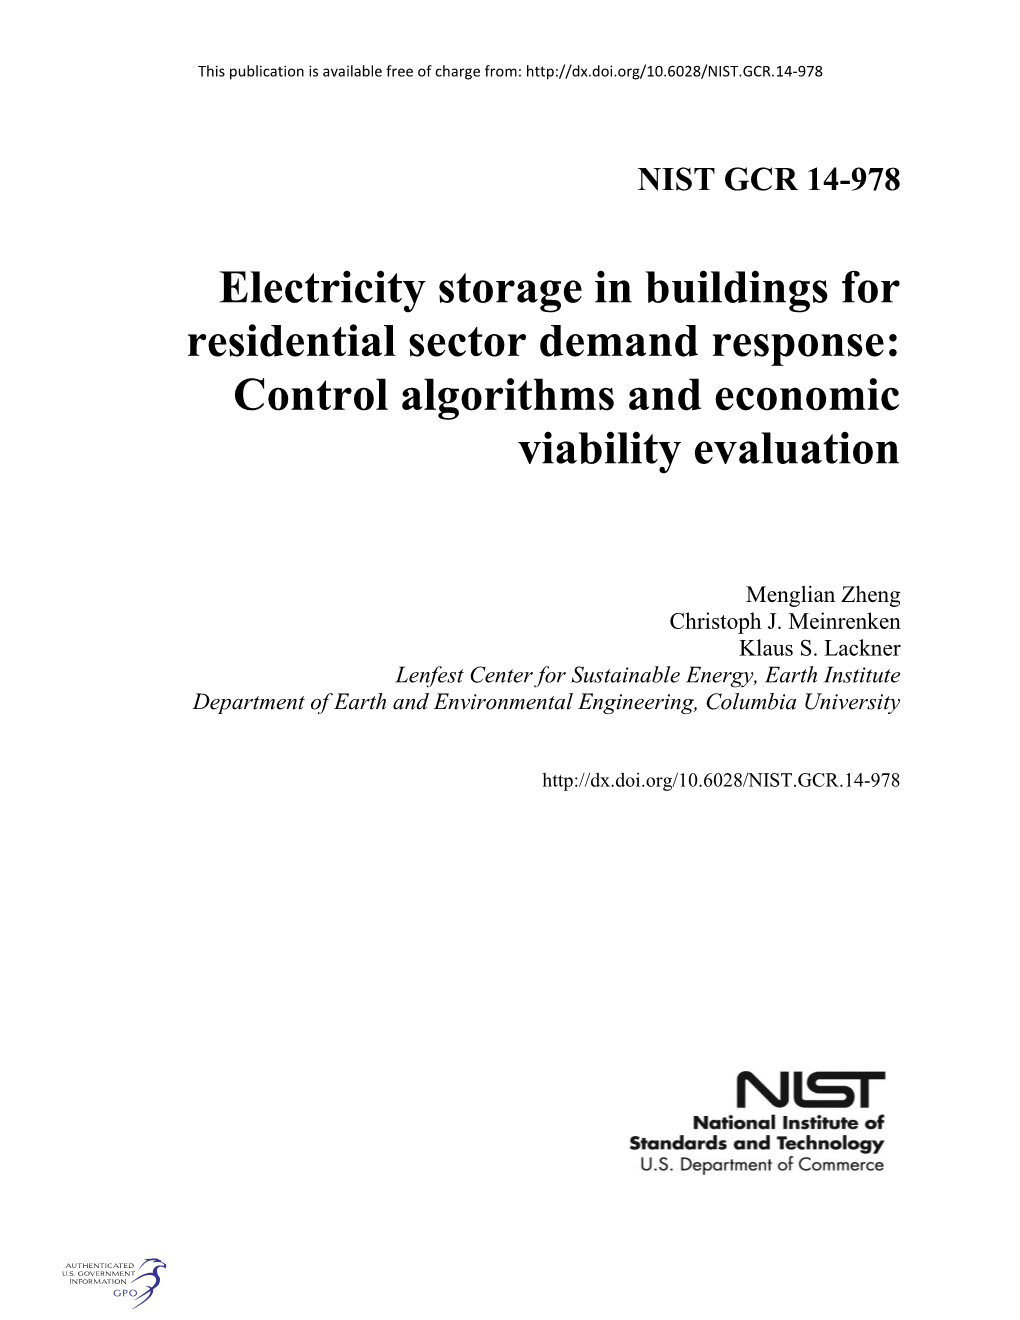 Electricity Storage in Buildings for Residential Sector Demand Response: Control Algorithms and Economic Viability Evaluation